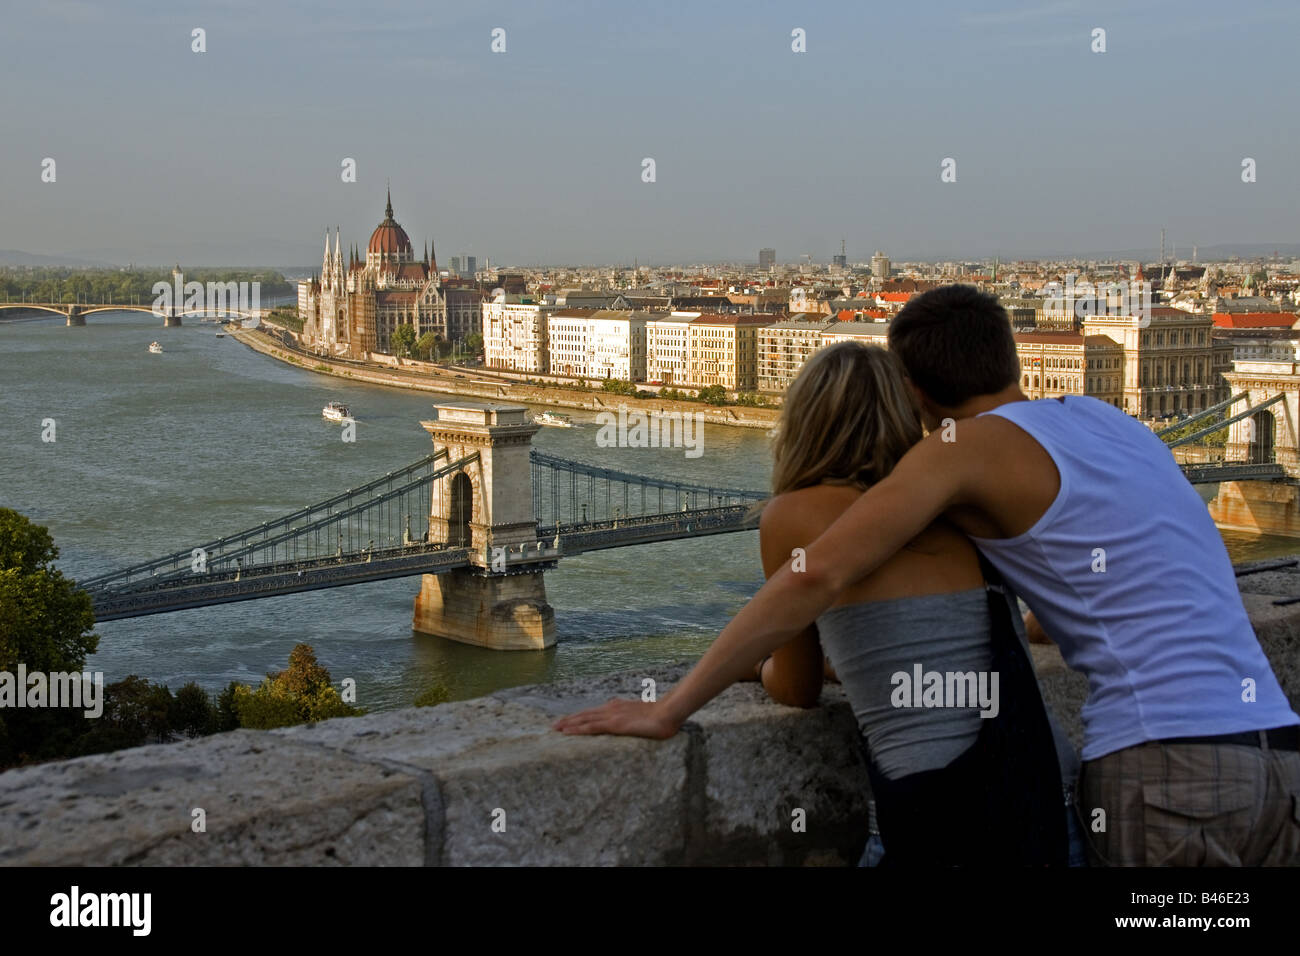 Budapest Chain Bridge over Danube River with Parliament in background on Pest side with romantic couple on Buda Castle overlook Stock Photo